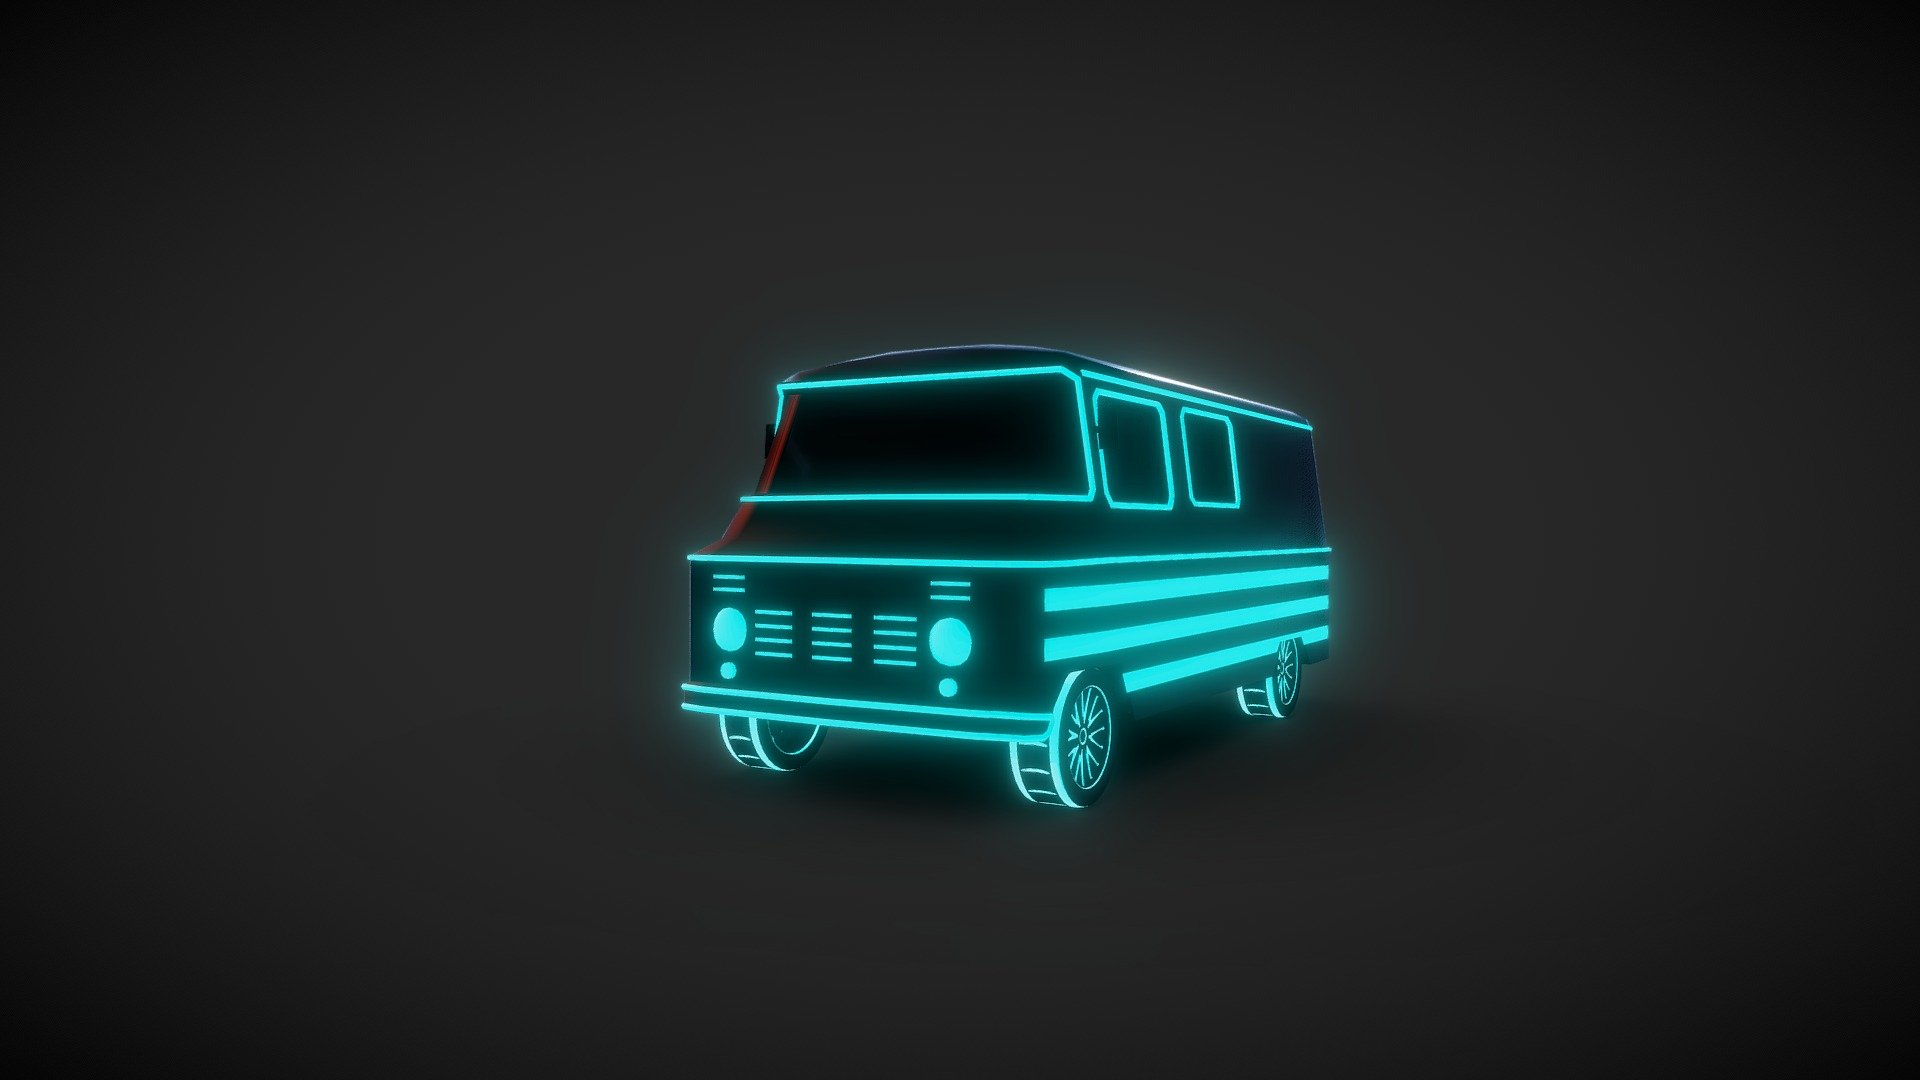 Car model made for Electro Ride game http://electroridegame.com You can add game to your Whishlist now! https://store.steampowered.com/app/696150 We are going to PC and Nintendo Switch! Stay tuned! Code &amp; Design: Sylwester Osik Graphics: Robert i Wojciech Miedziocha Music: Maciej Kulesza - Electro Ride car Zuk - 3D model by wojciechmiedziocha 3d model